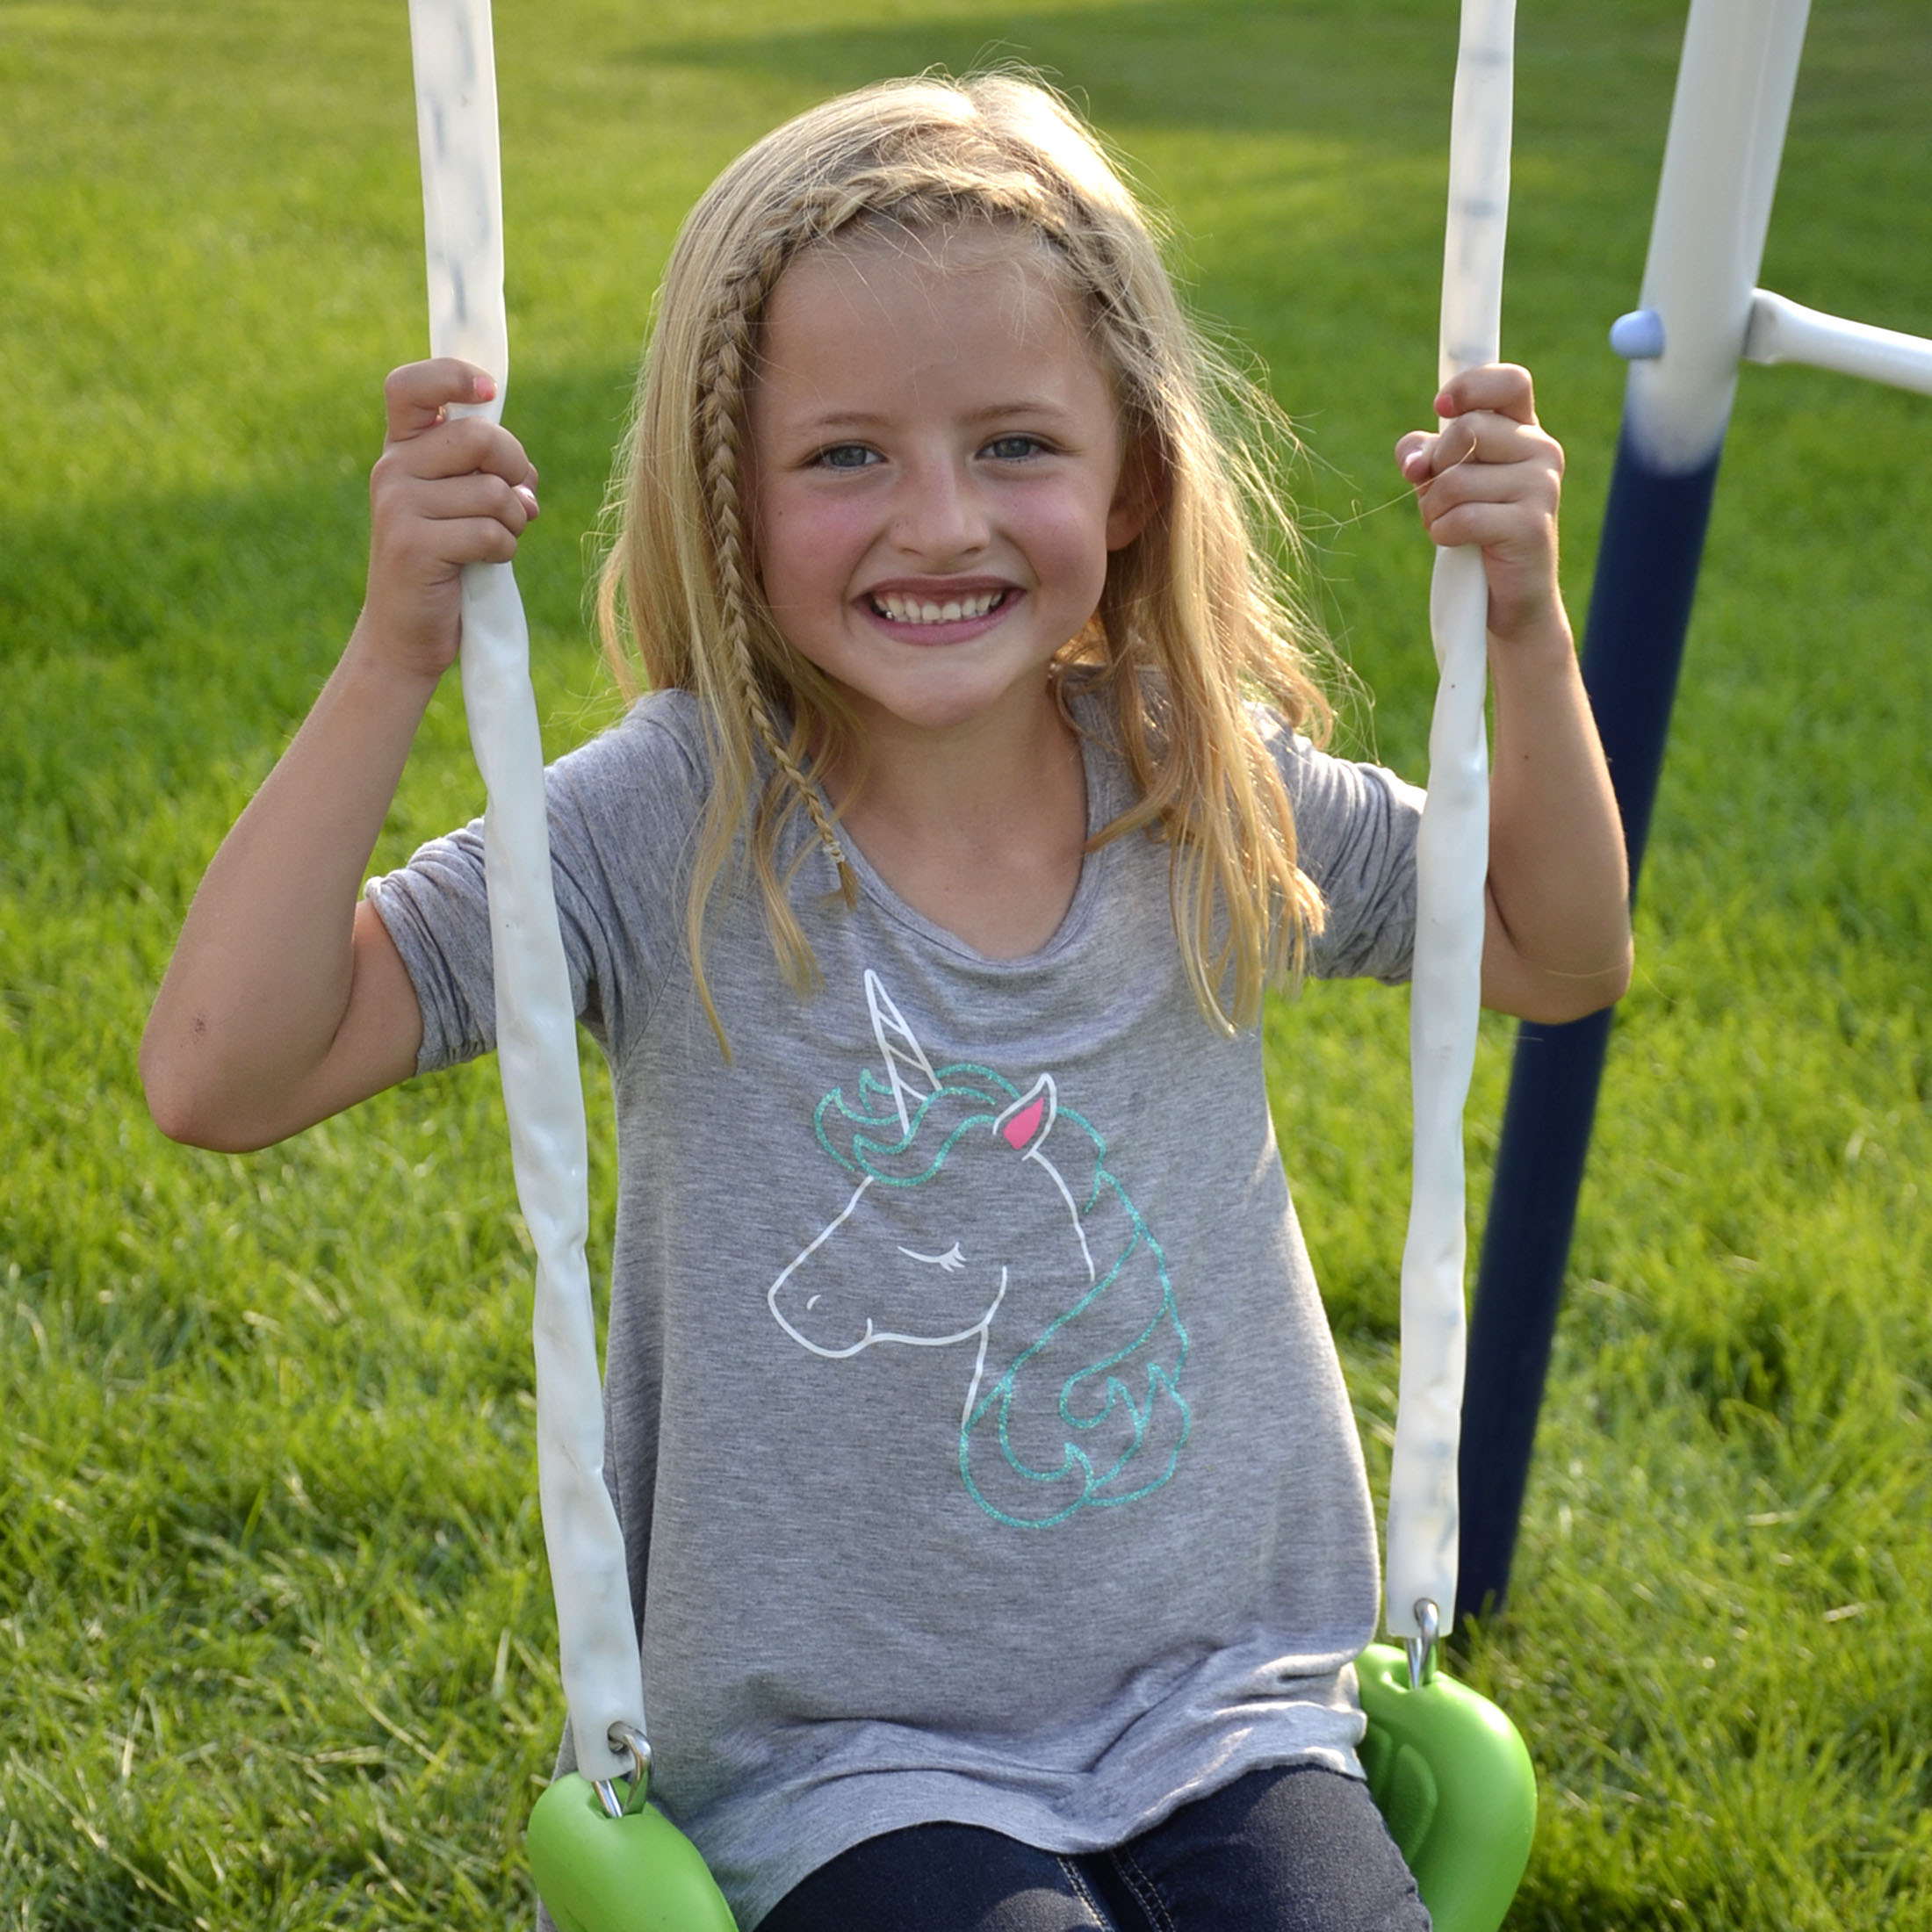 Sportspower Sierra Vista Outdoor Metal Swing Set with Trapeze, Lifetime Warranty on Blow Molded Slide, and Bonus Anchor Kit - image 4 of 12